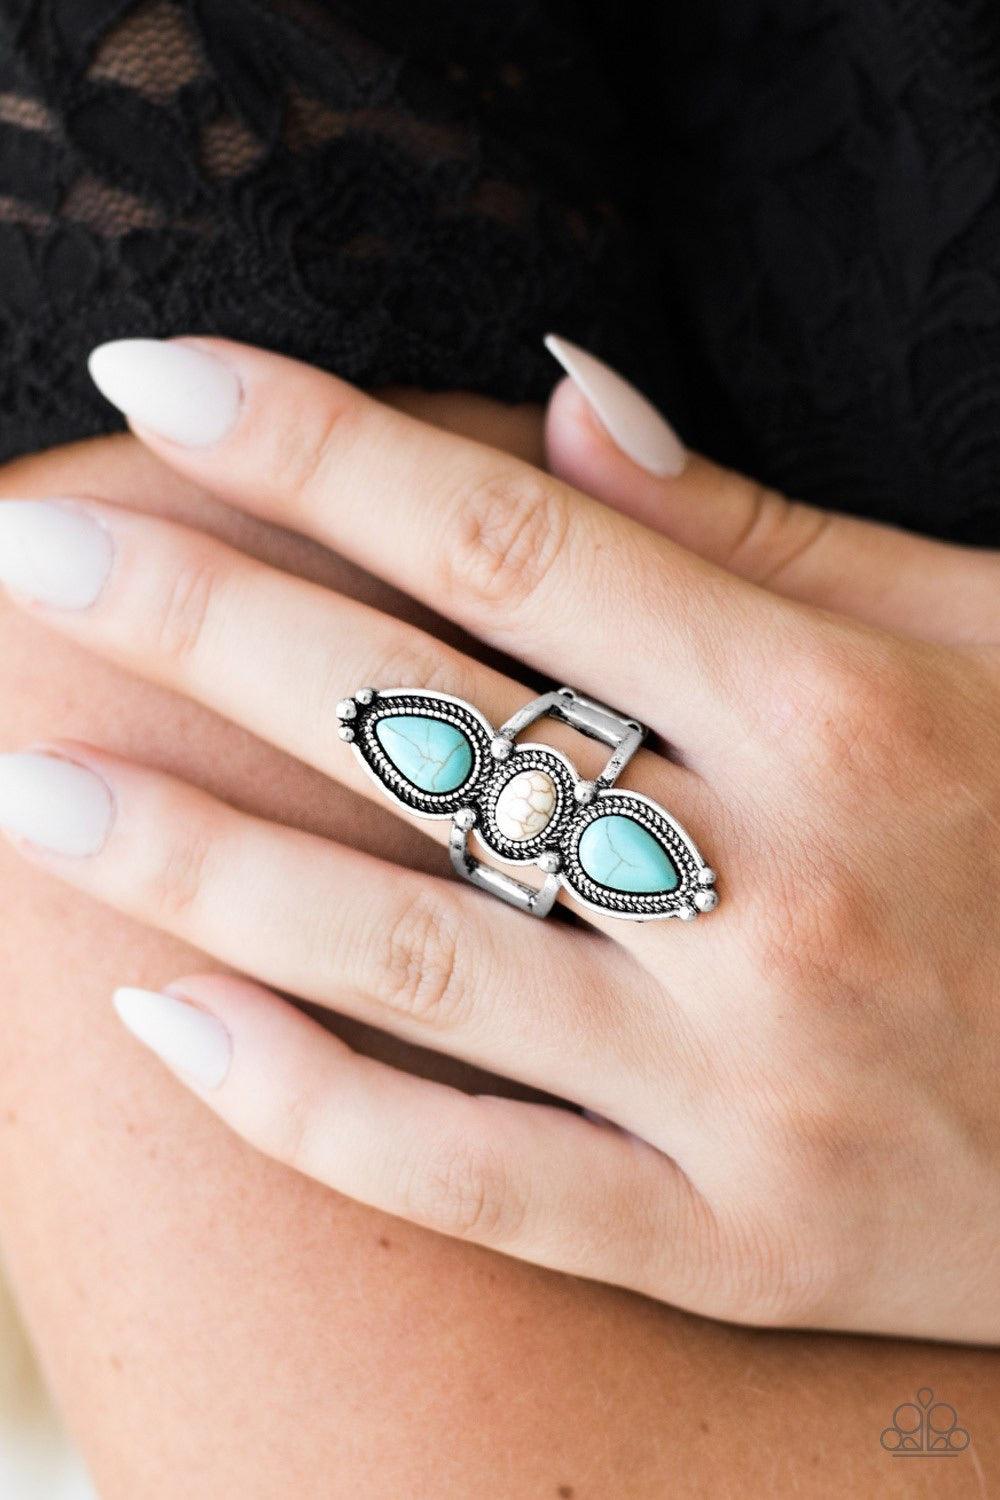 Paparazzi Accessories Calling All Chiefs - Multi Smooth turquoise and white stone beads are pressed into an elongated silver frame. Dotted with silver studs and embossed in stunning rope-like textures, the dramatic frame extends down the finger in a simpl